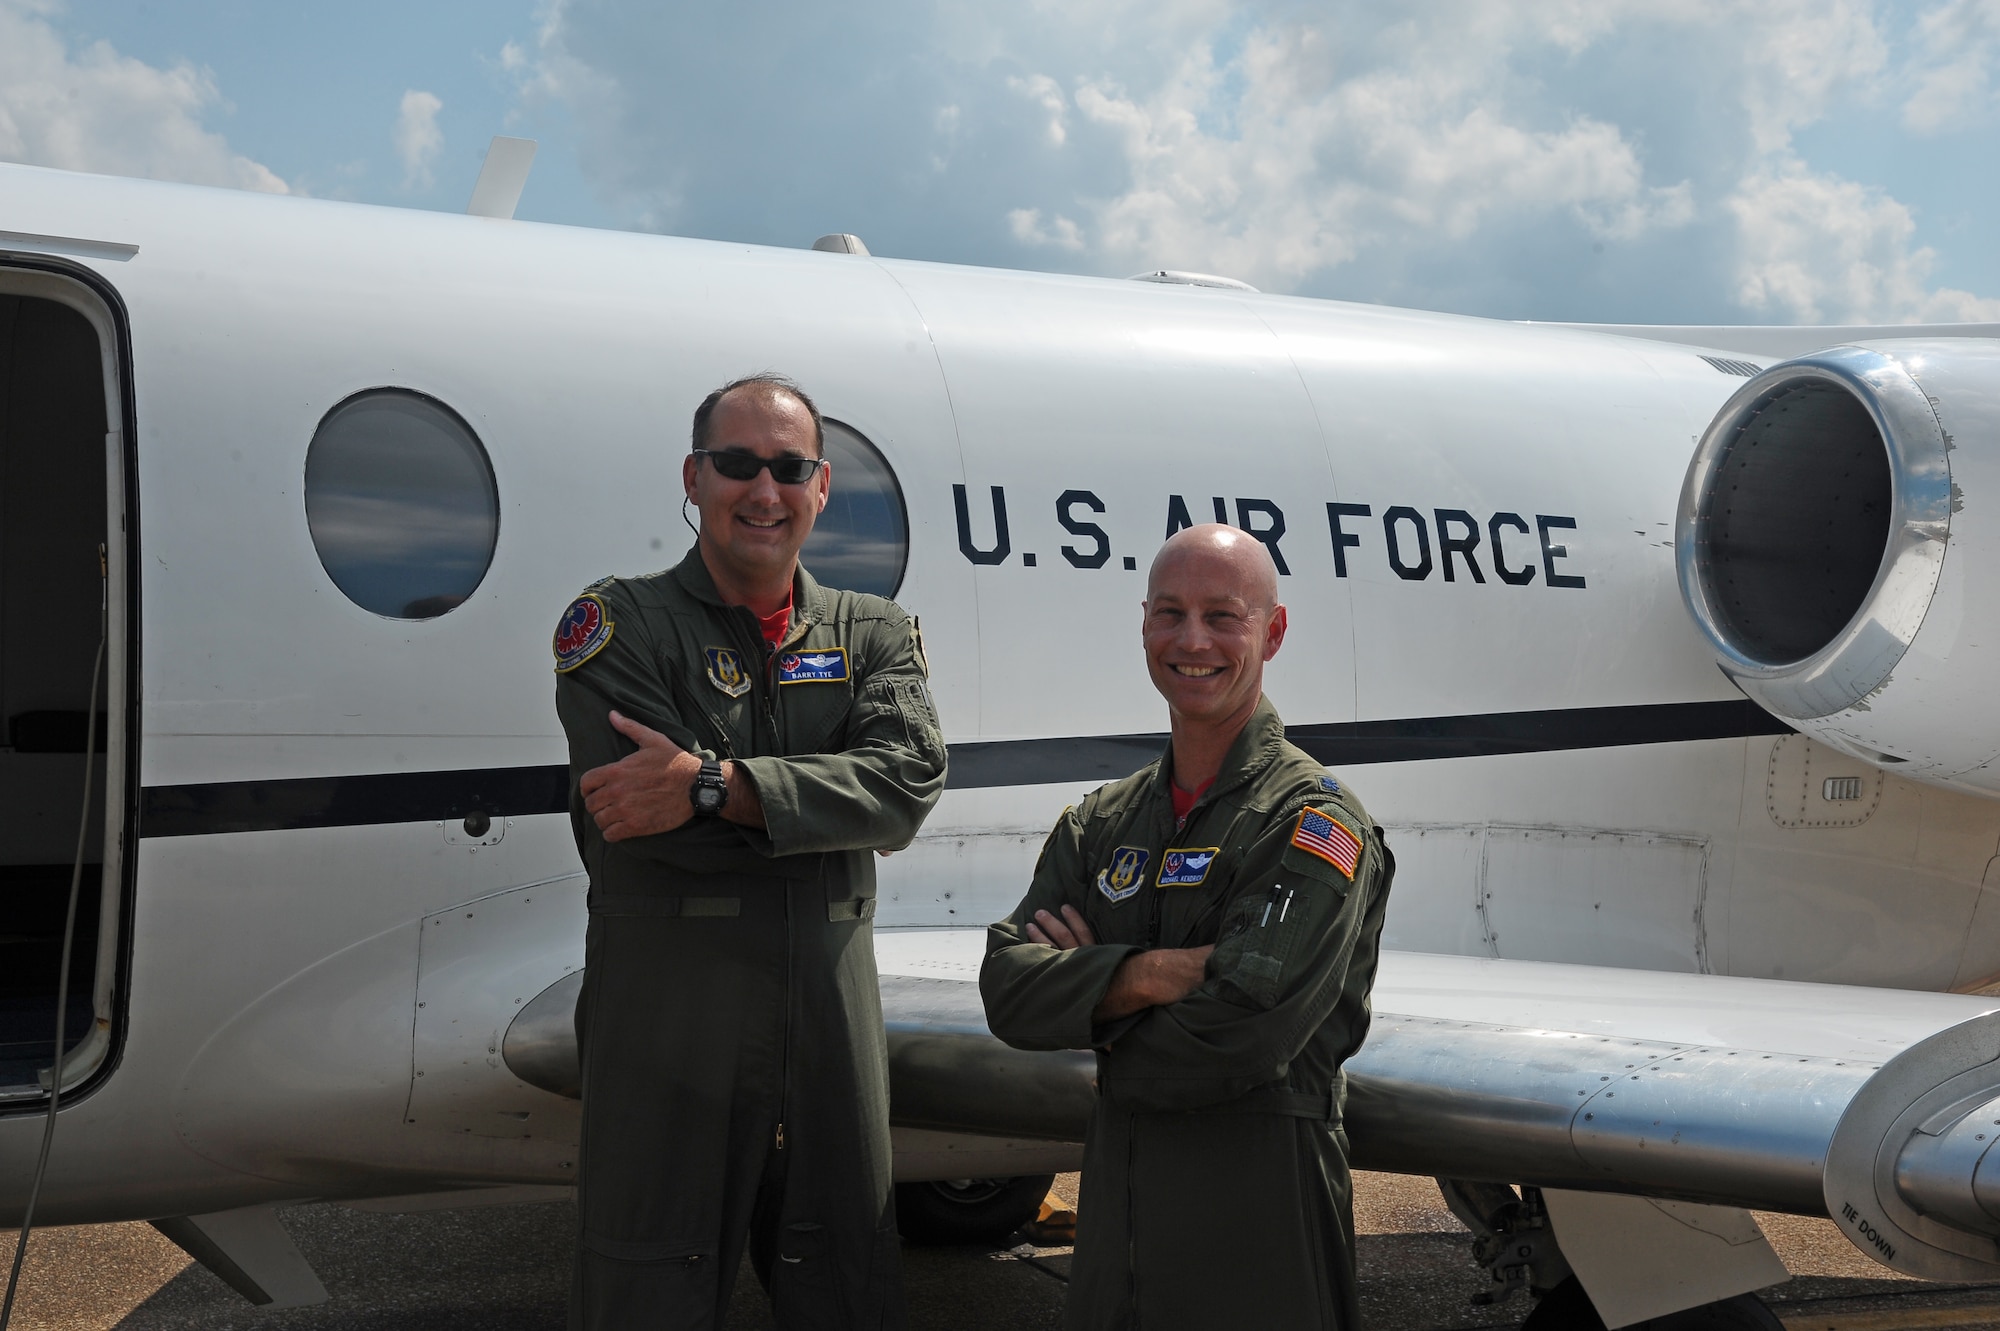 Lt. Col. Barry Tye and Lt. Col. Michael Kendrick, both from the 43rd Flying Training Squadron, pause in front of a T-1 after their fini-flights August 14 on the Columbus Air Force Base flight line. Tye and Kendrick are both retiring after 19 years of serving Columbus Air Force Base. They have each flown over 4,000 hours in a T-1 at Columbus Air Force Base. (U.S. Air Force Photo/Airman 1st Class Stephanie Englar)
